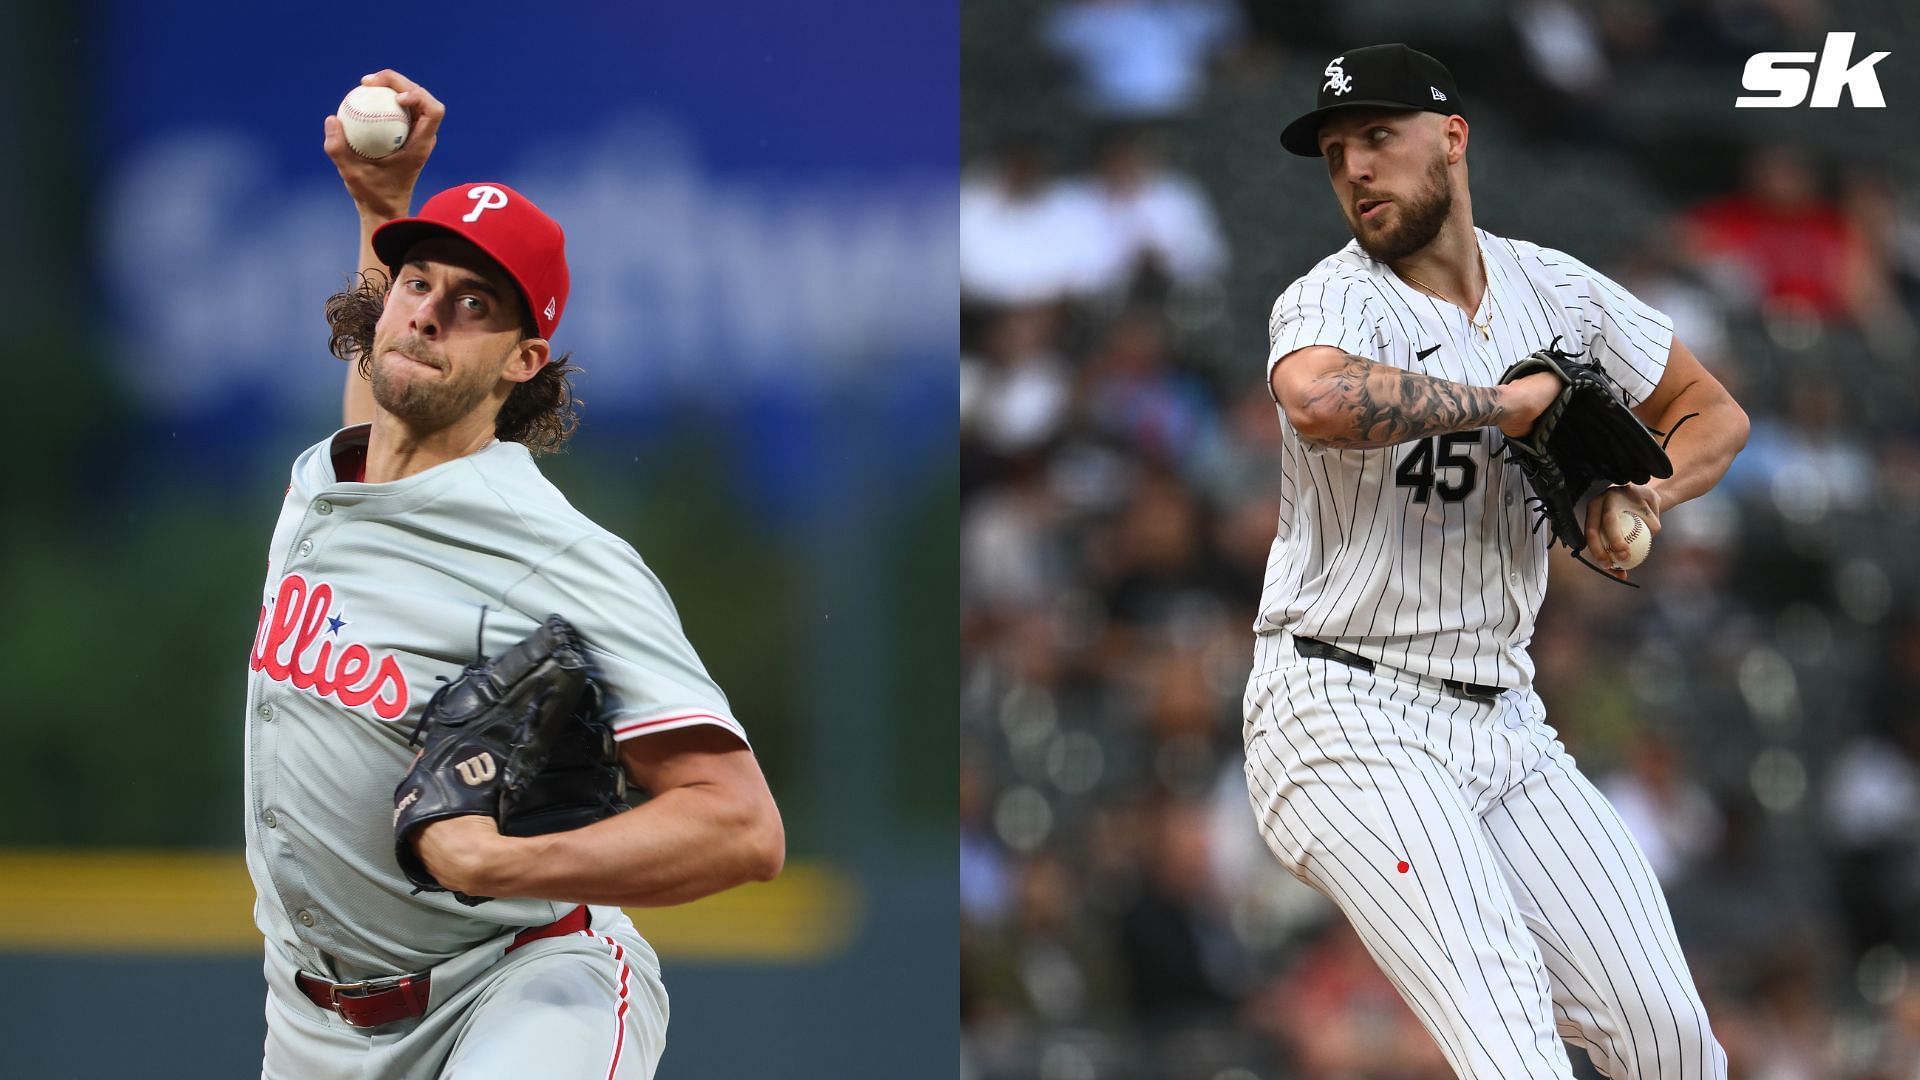 An excellent spread of pitching matchups will take place on Monday around MLB